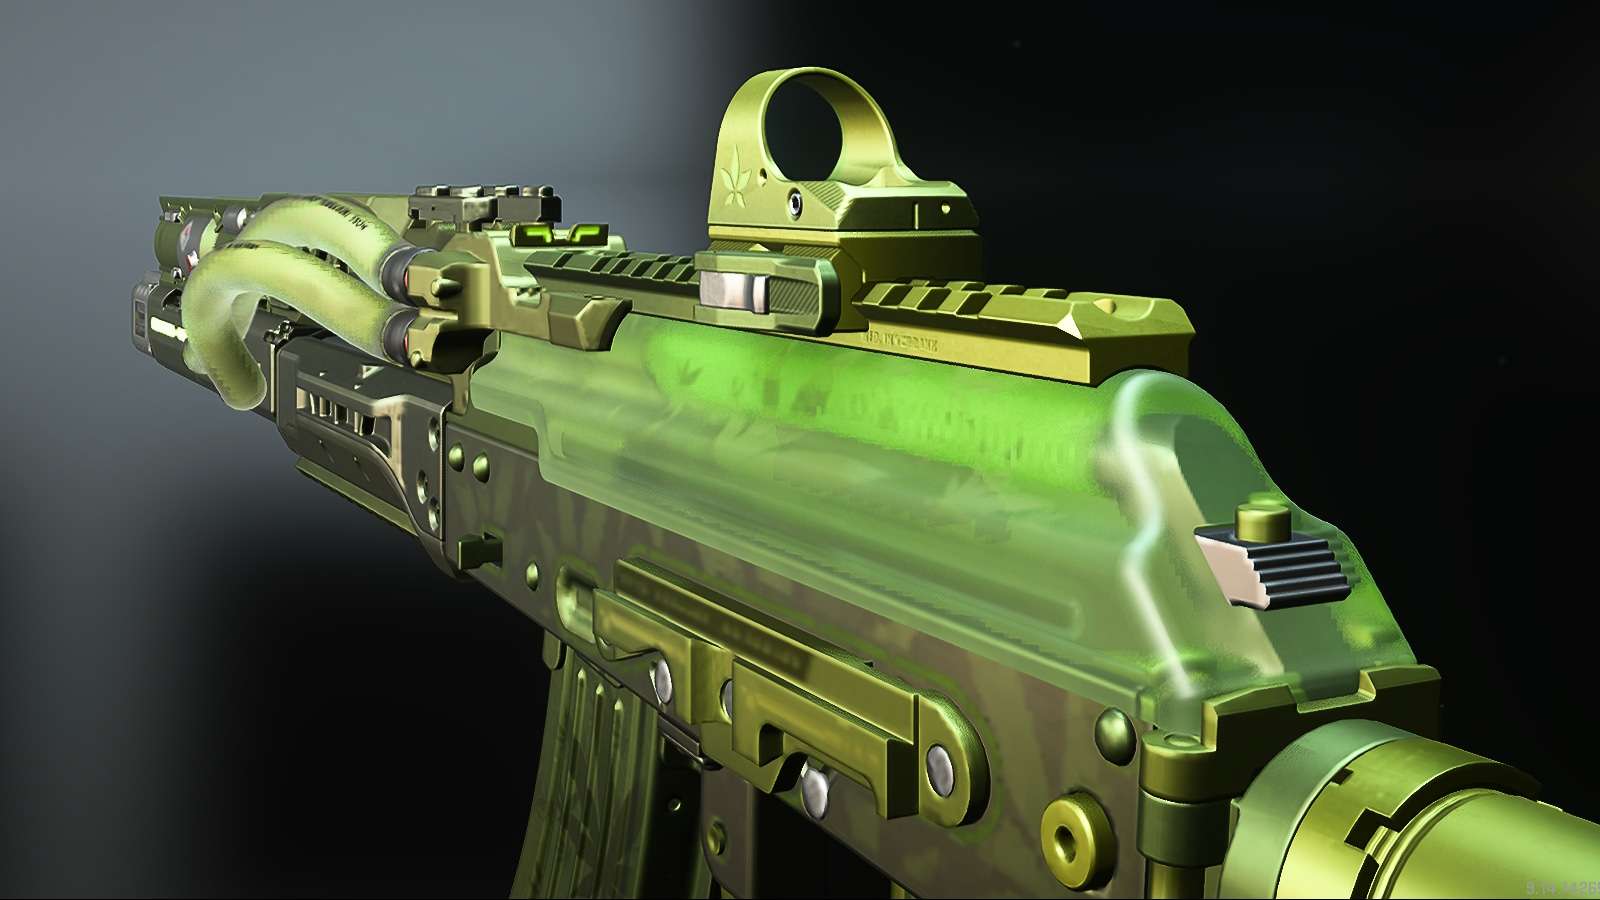 the warzone 2 kastov 762 vaporizer variant during weapon preview.